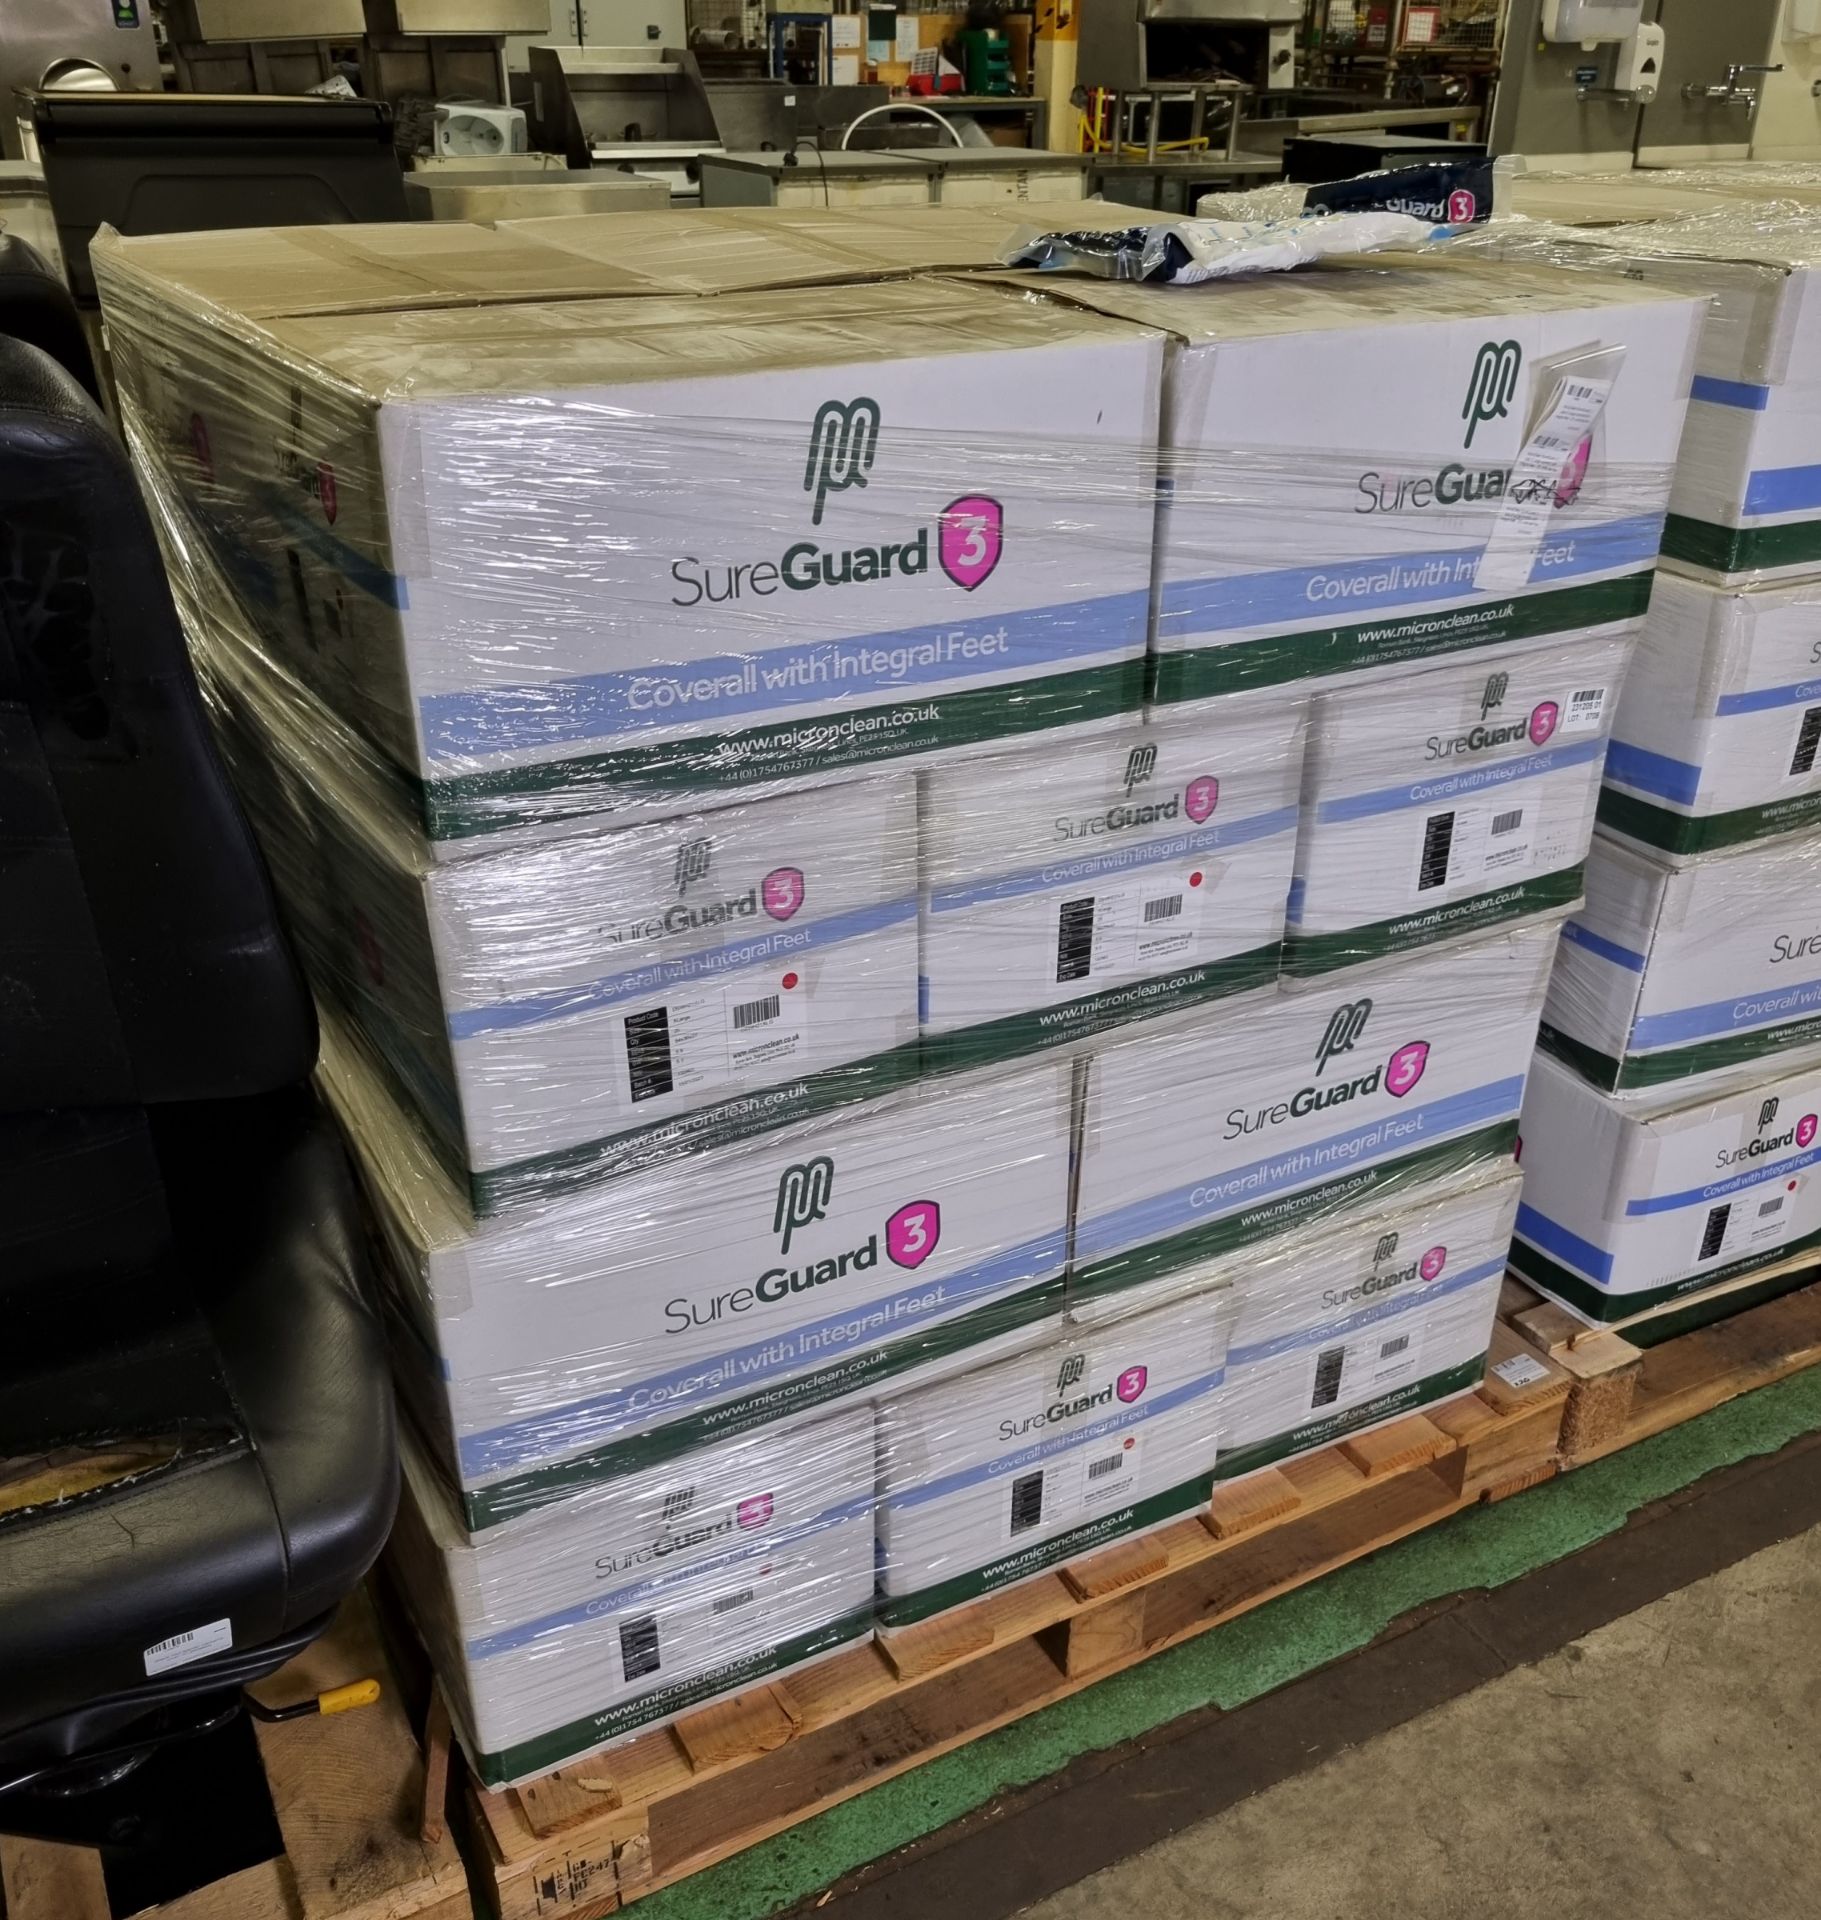 20x boxes of MicroClean SureGuard 3 - size X Large coverall with integral feet - 25 per box - Bild 2 aus 5